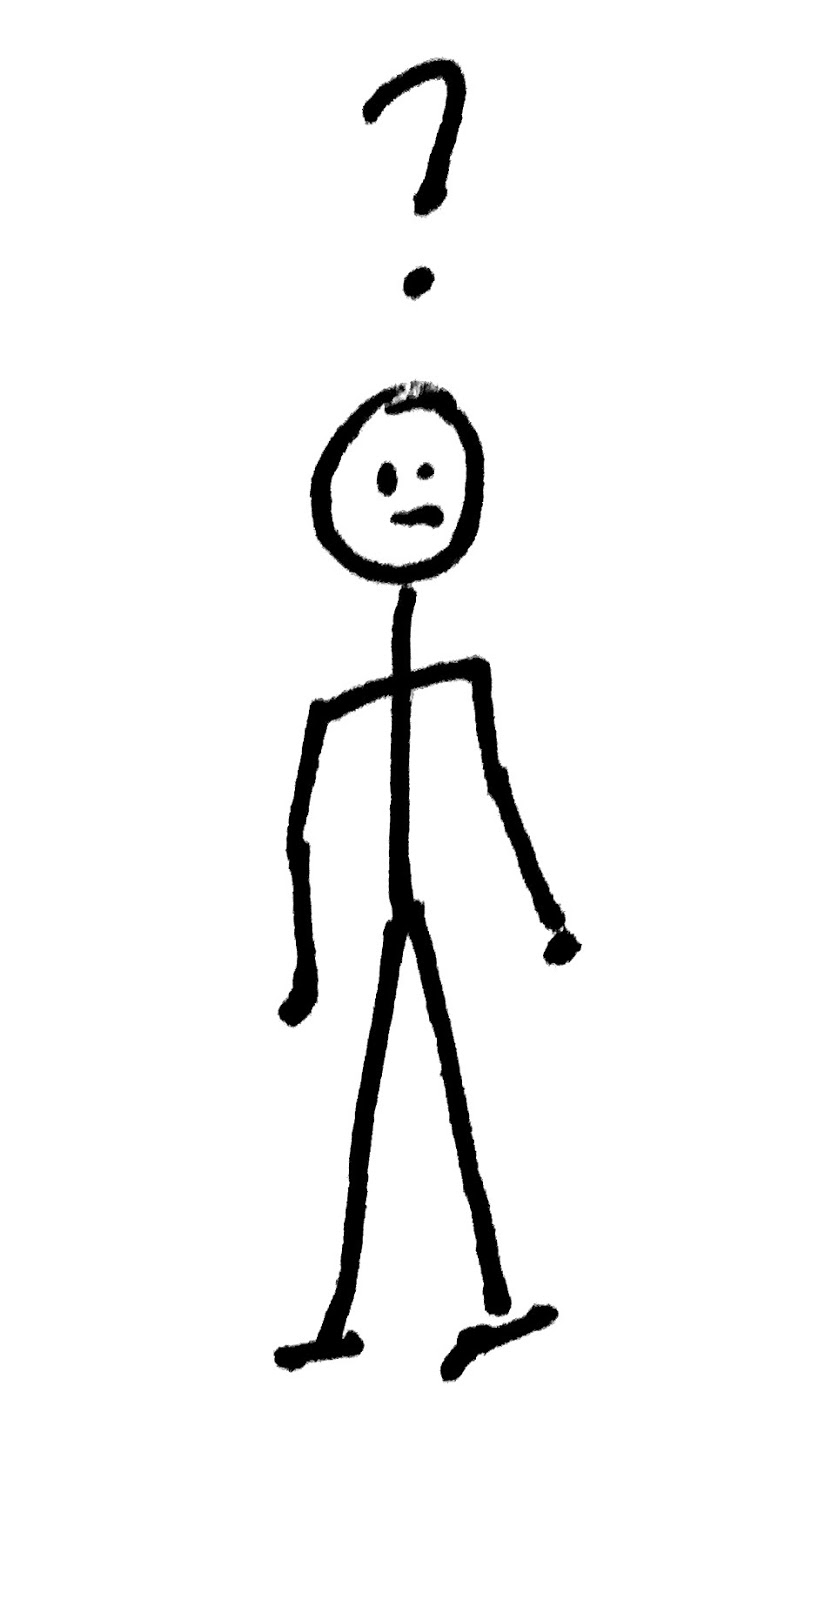 A drawing of a quizzical looking stick figure examining a manageable set of components.